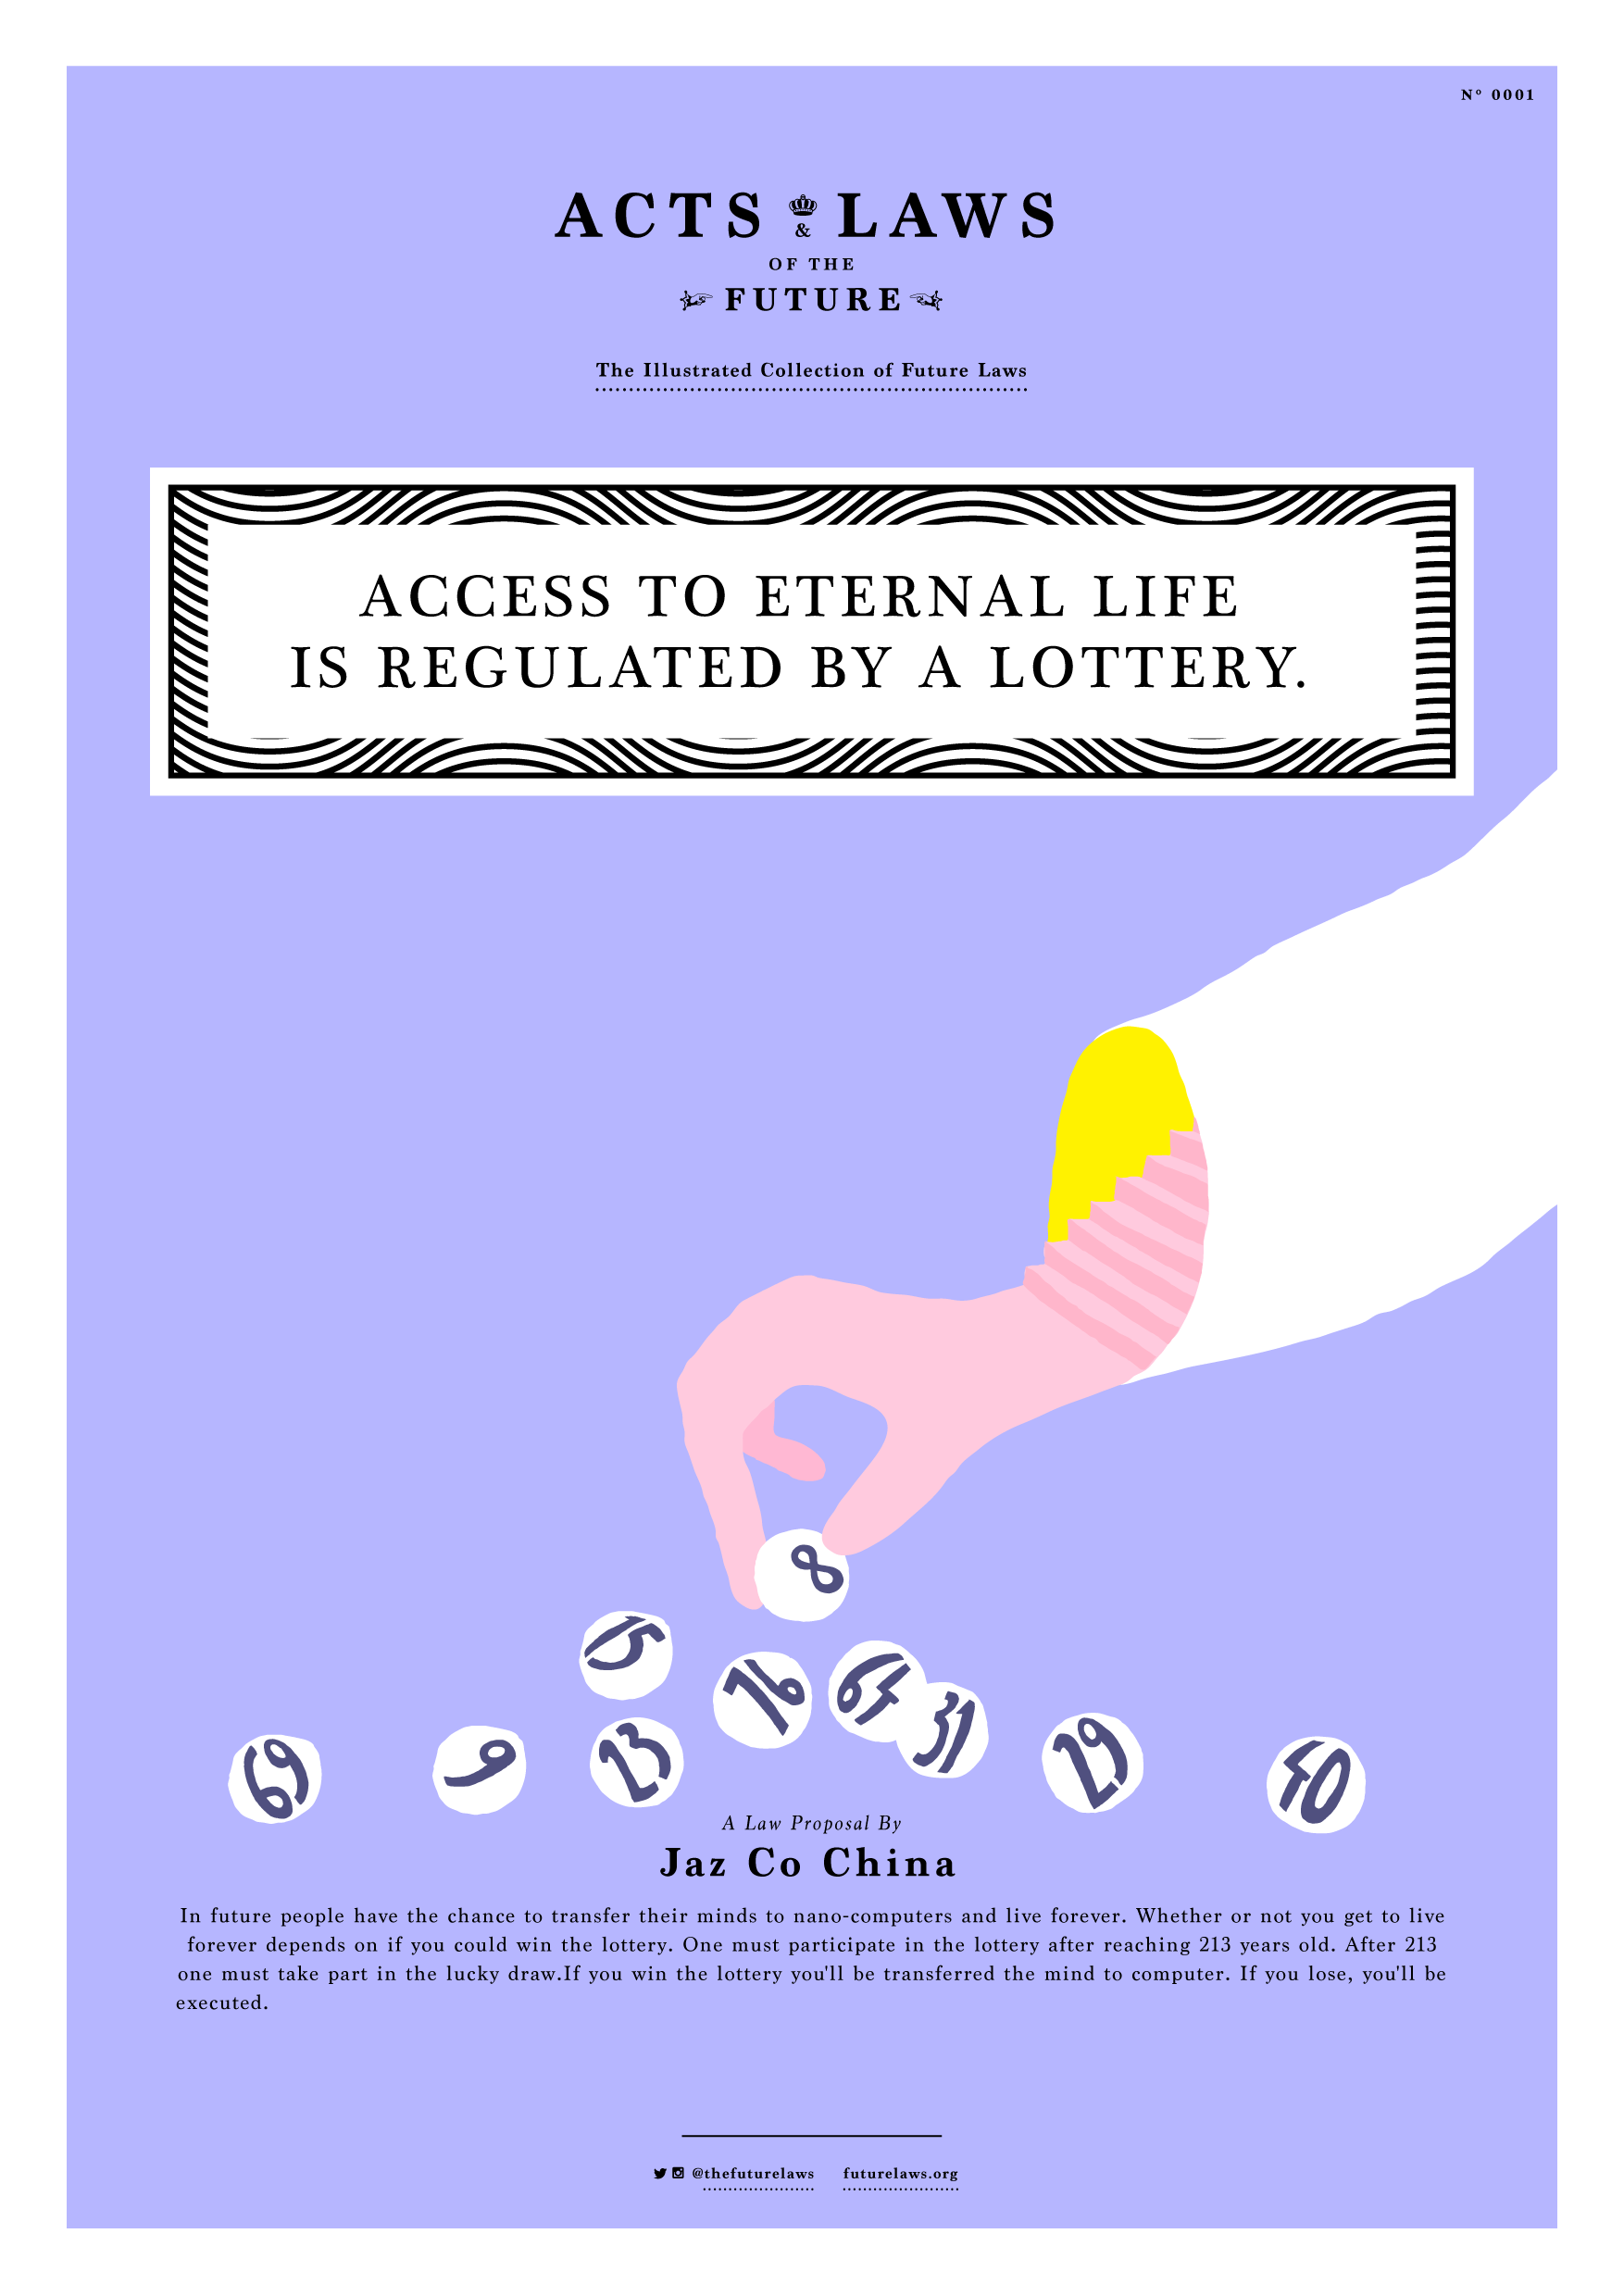 Access to eternal life is regulated by a lottery.